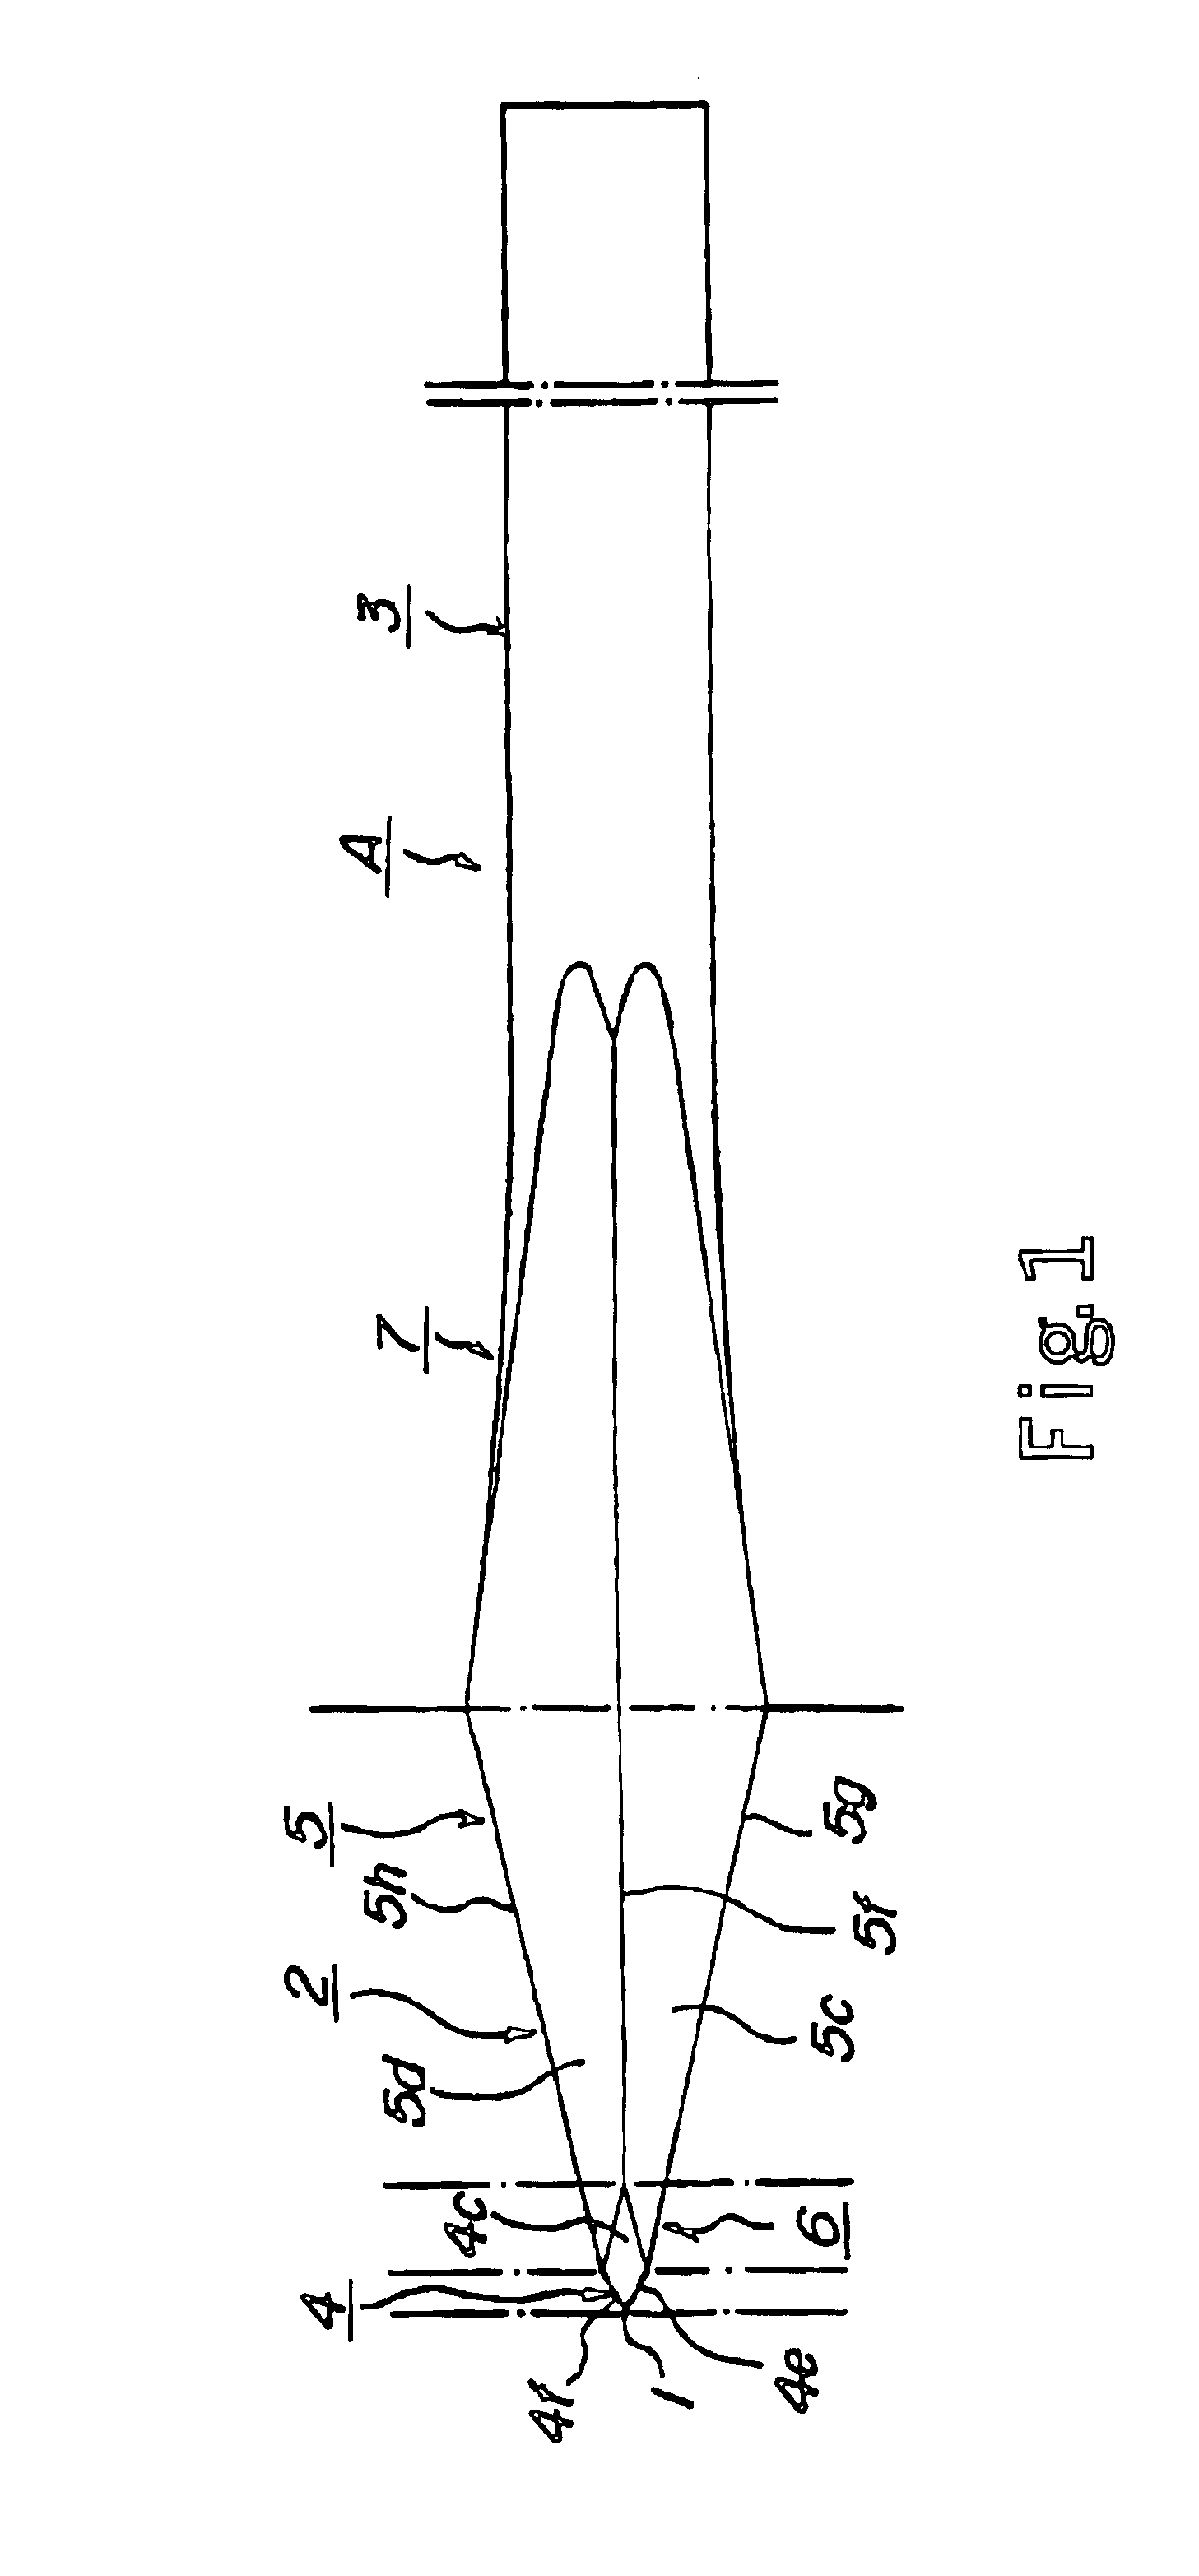 Medical bladed device